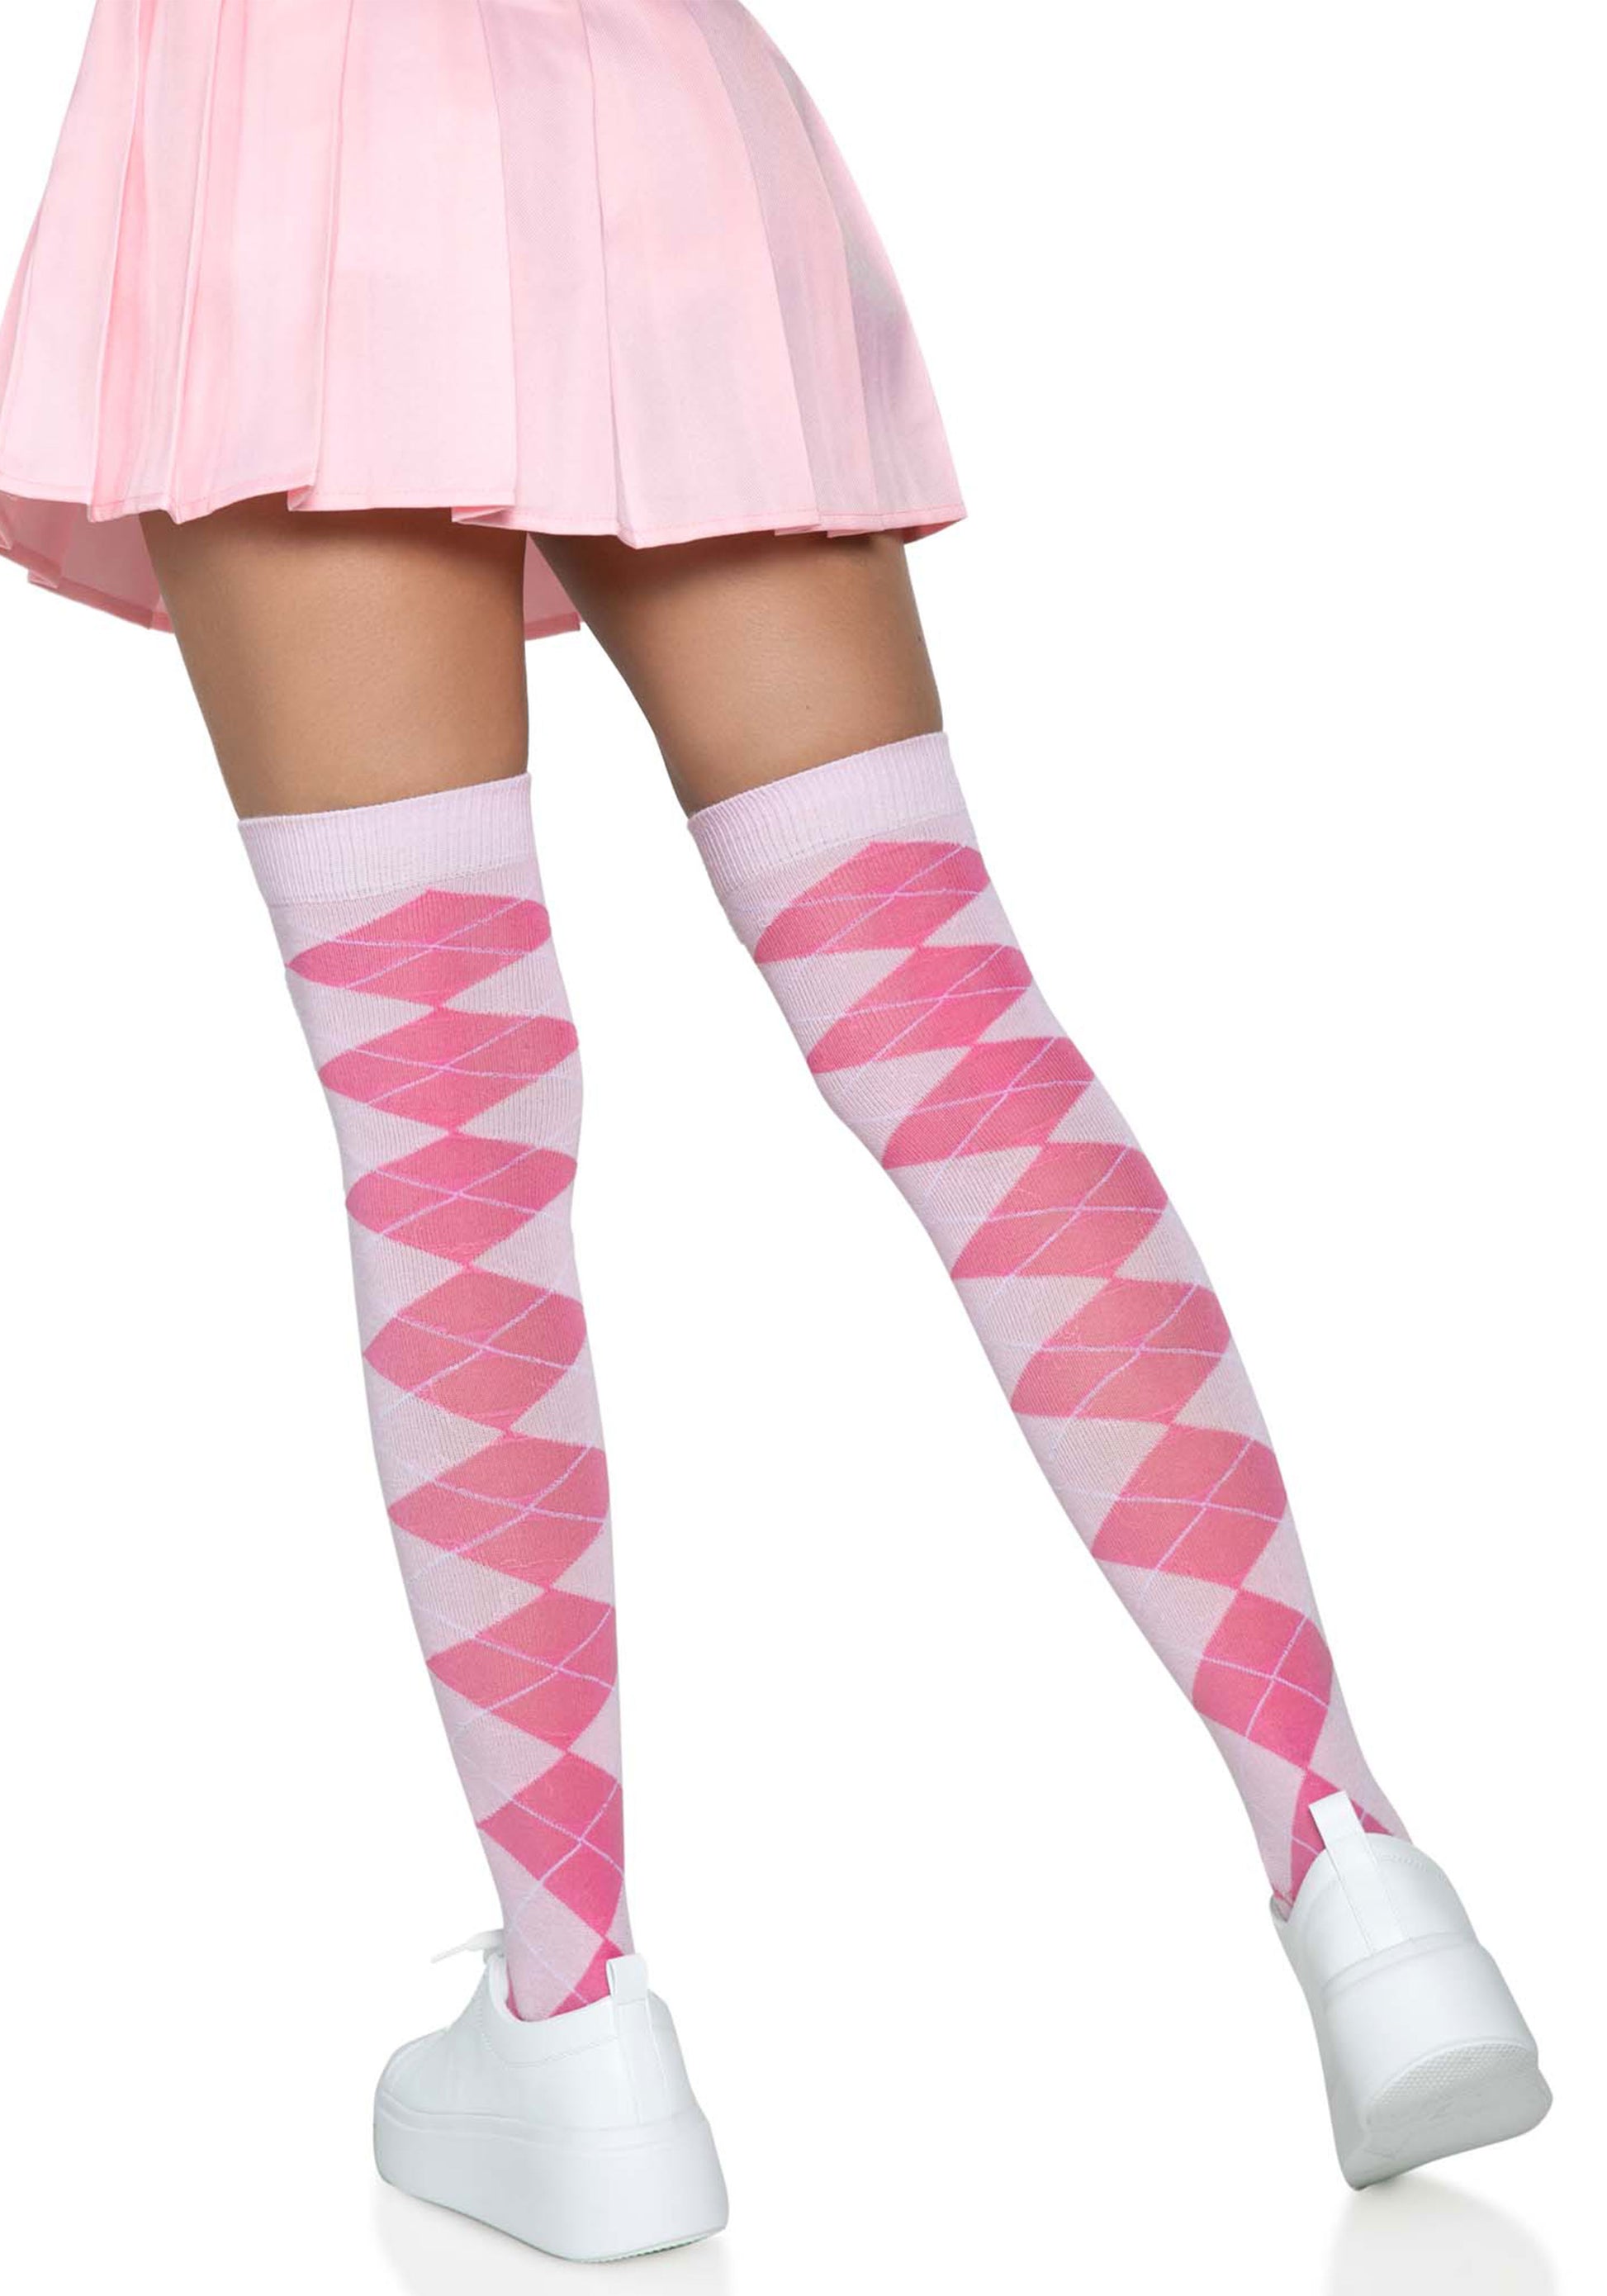 Leg Avenue Argyle Thigh Highs - Pink knitted argyle diamond golf style patterned over the knee socks.